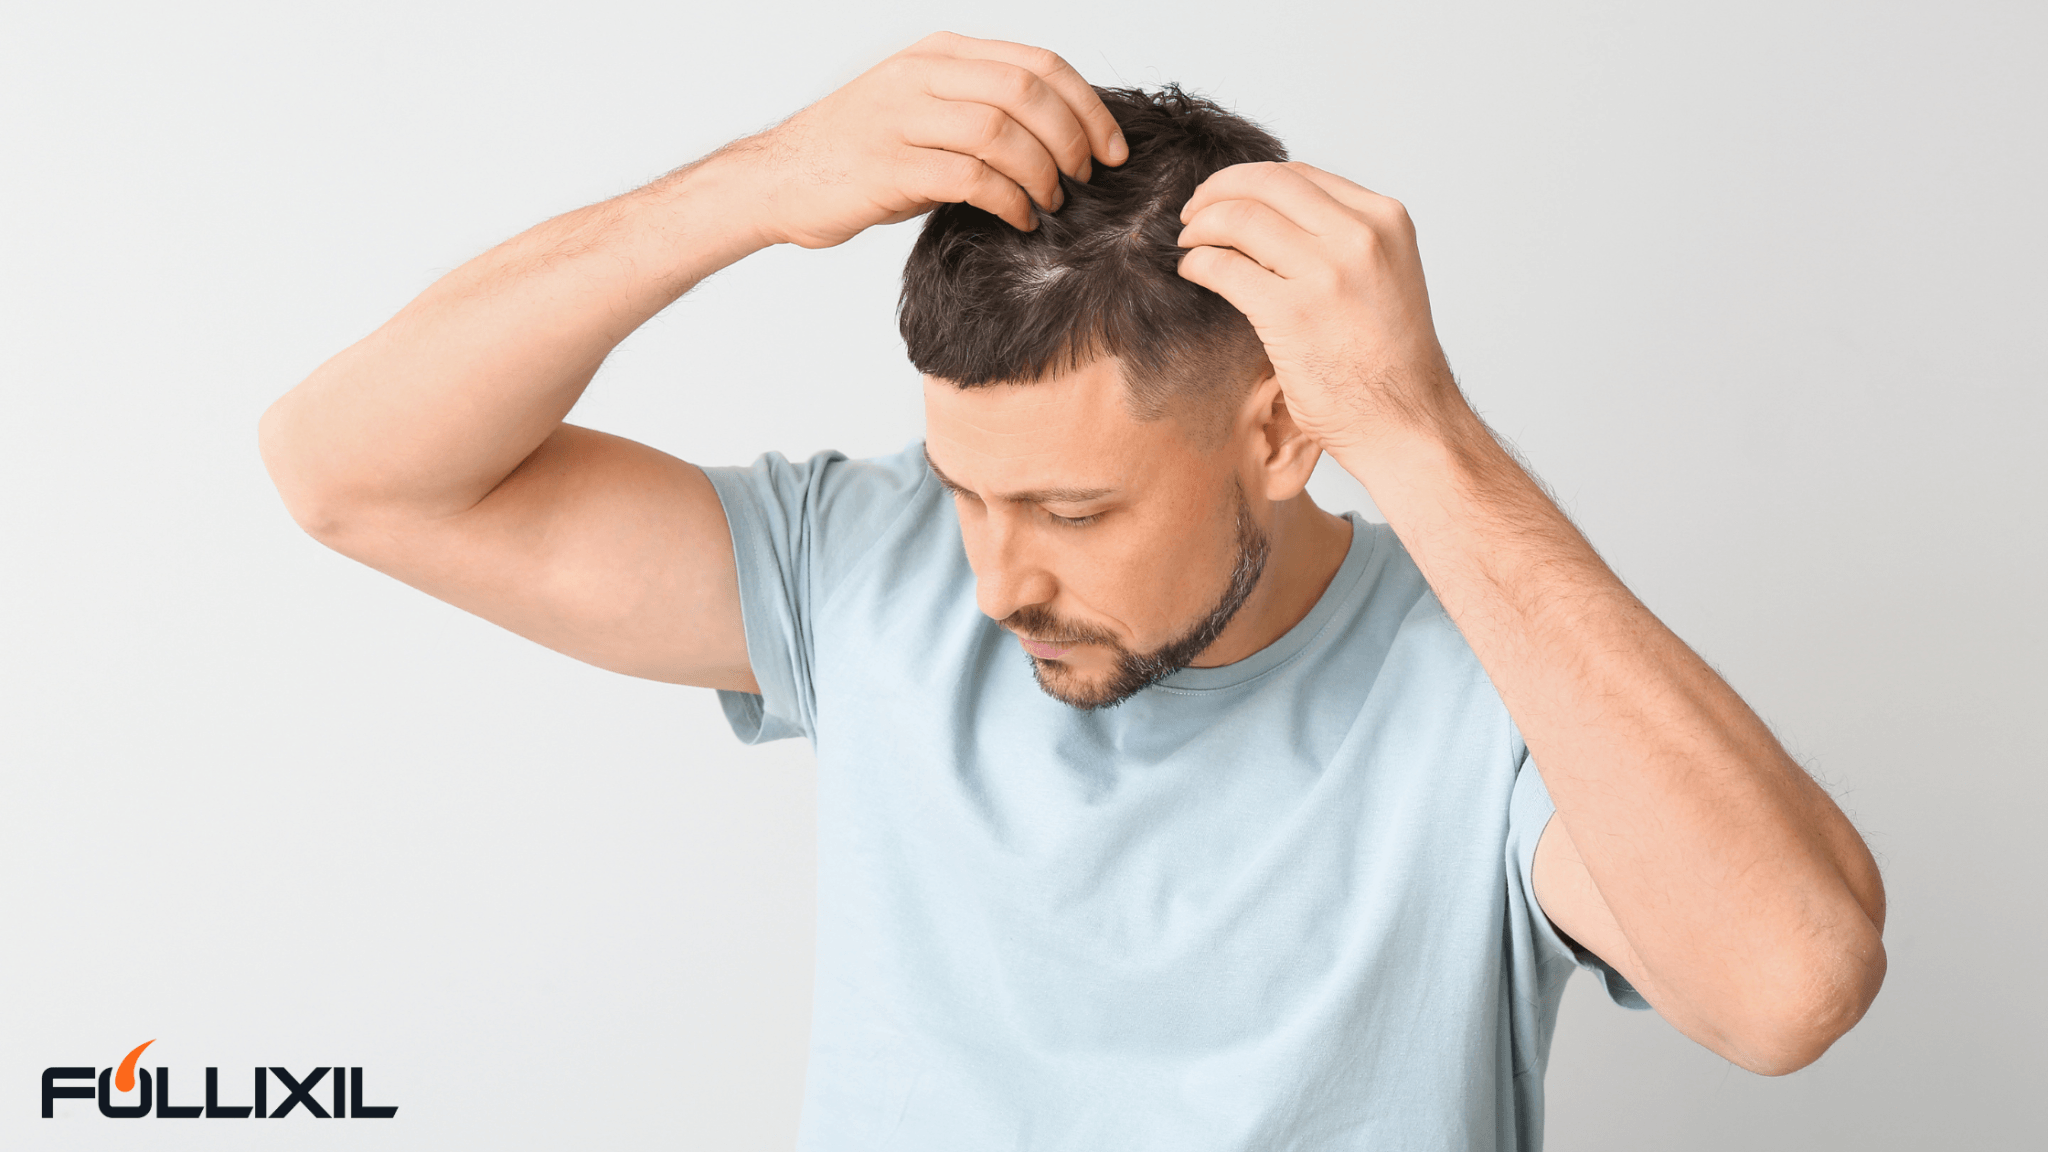 Ketoconazole : ( Quick Overview ) - Follicle Booster